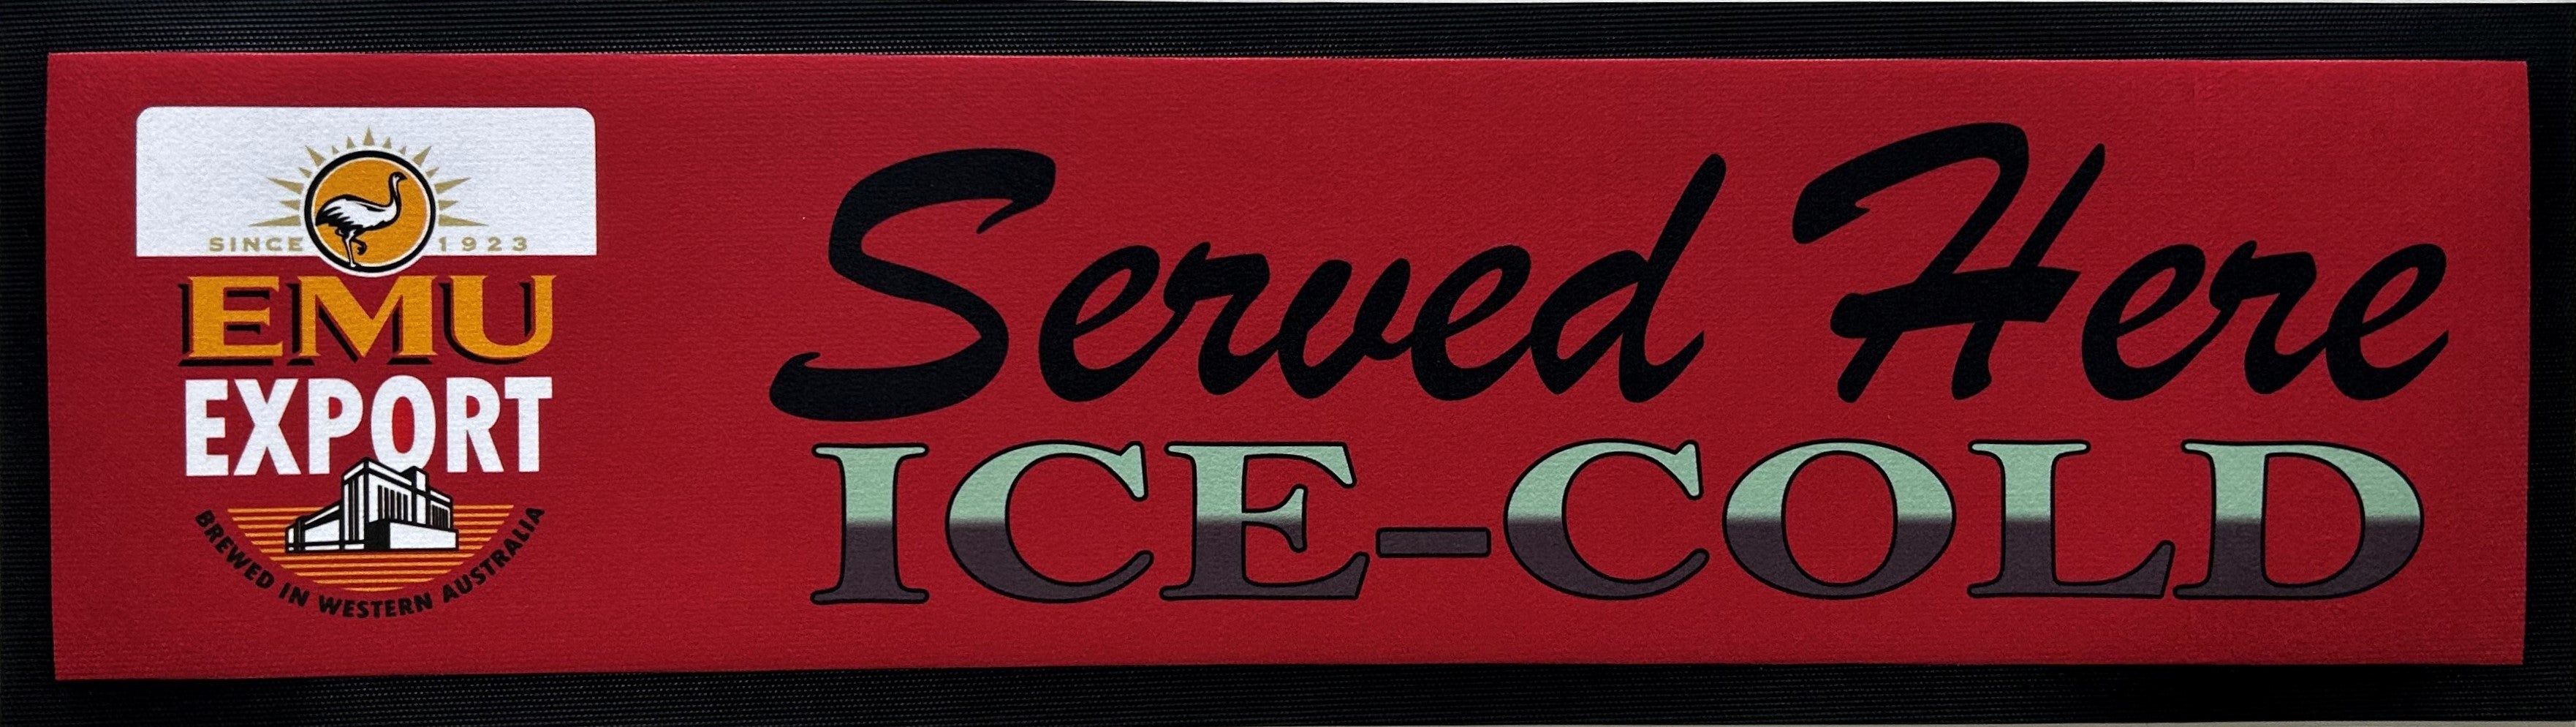 Emu Export "Served Here Ice Cold" Premium Rubber-Backed Bar Mat Runner - KING CAVE